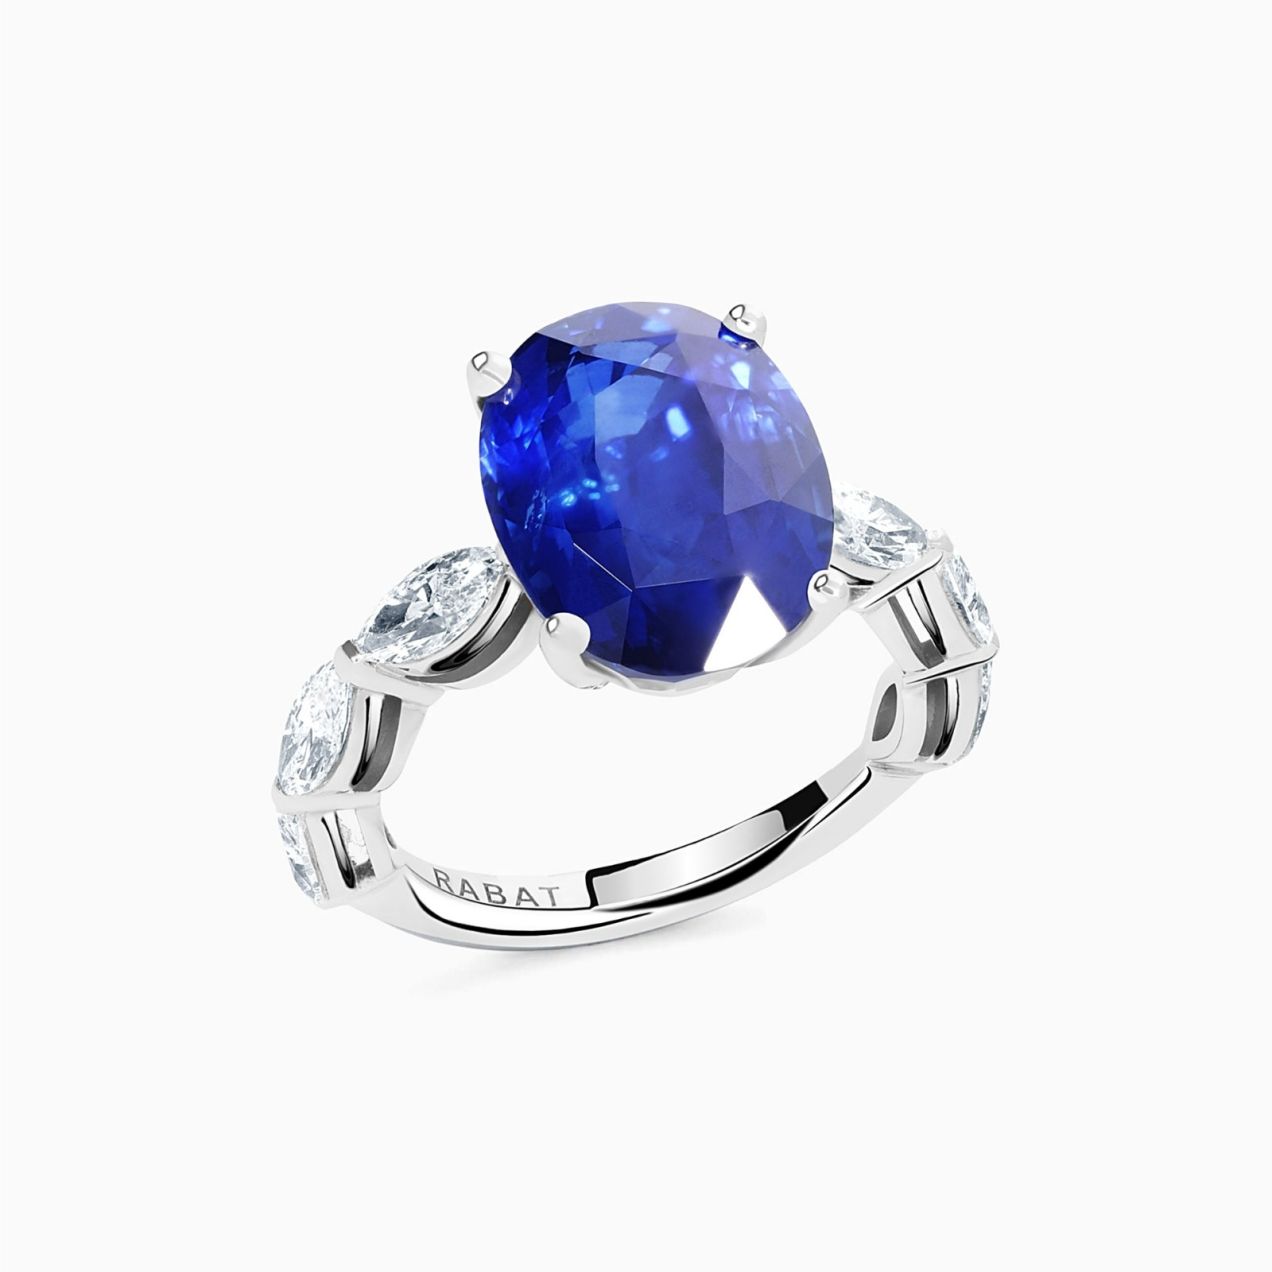 White gold with central marquise cut blue sapphire ring